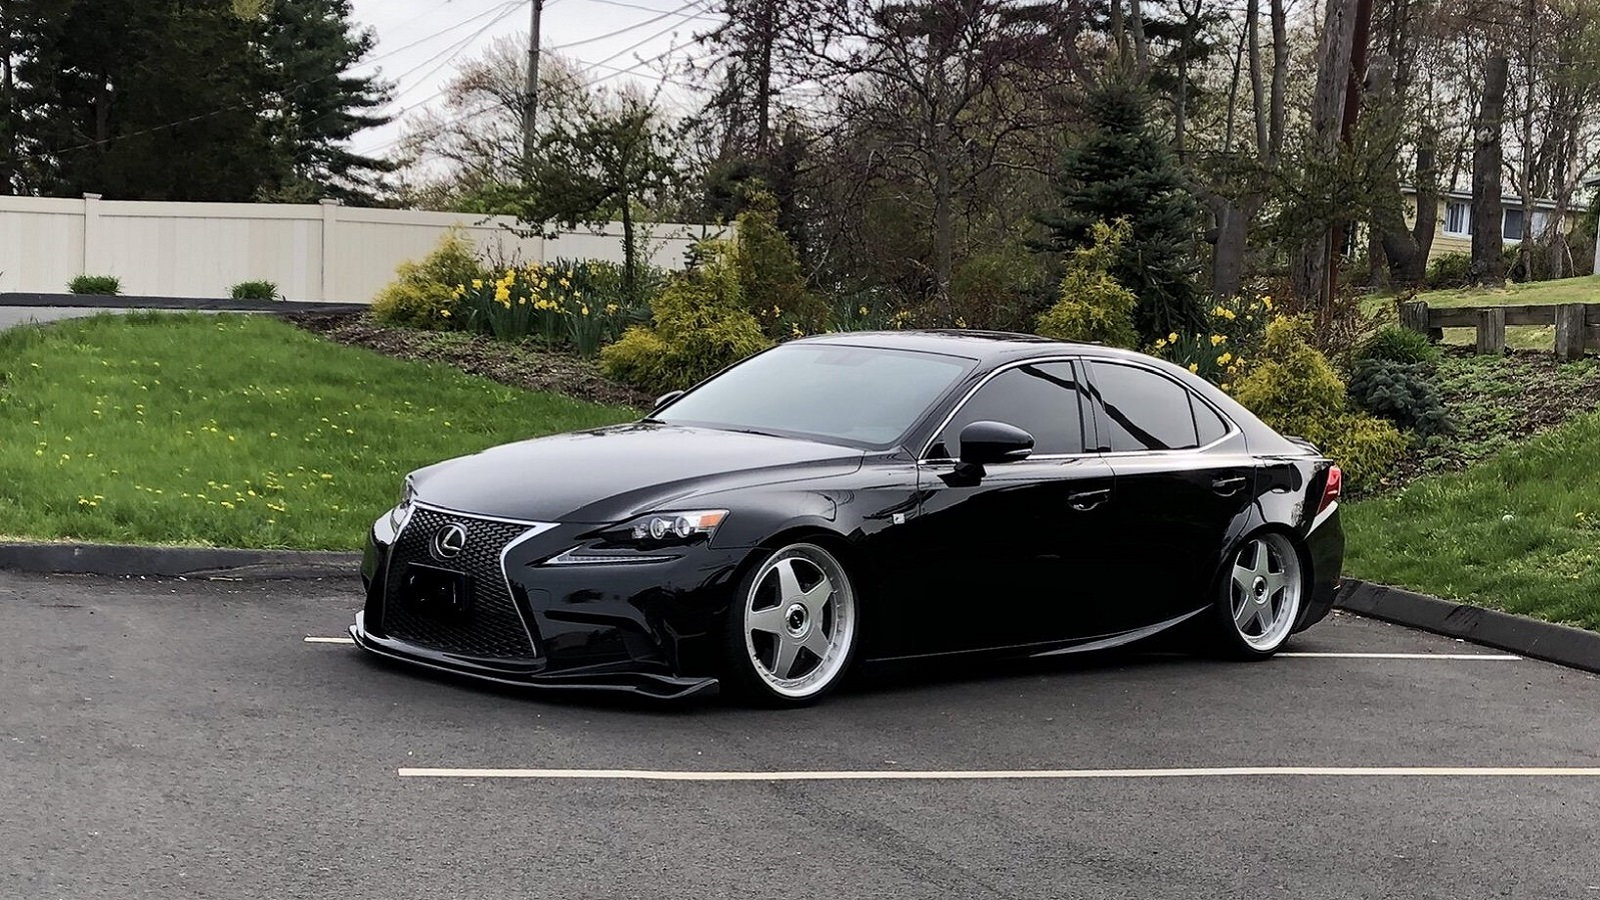 Bagged Lexus IS300 F Sport Is the Real VIP | Clublexus